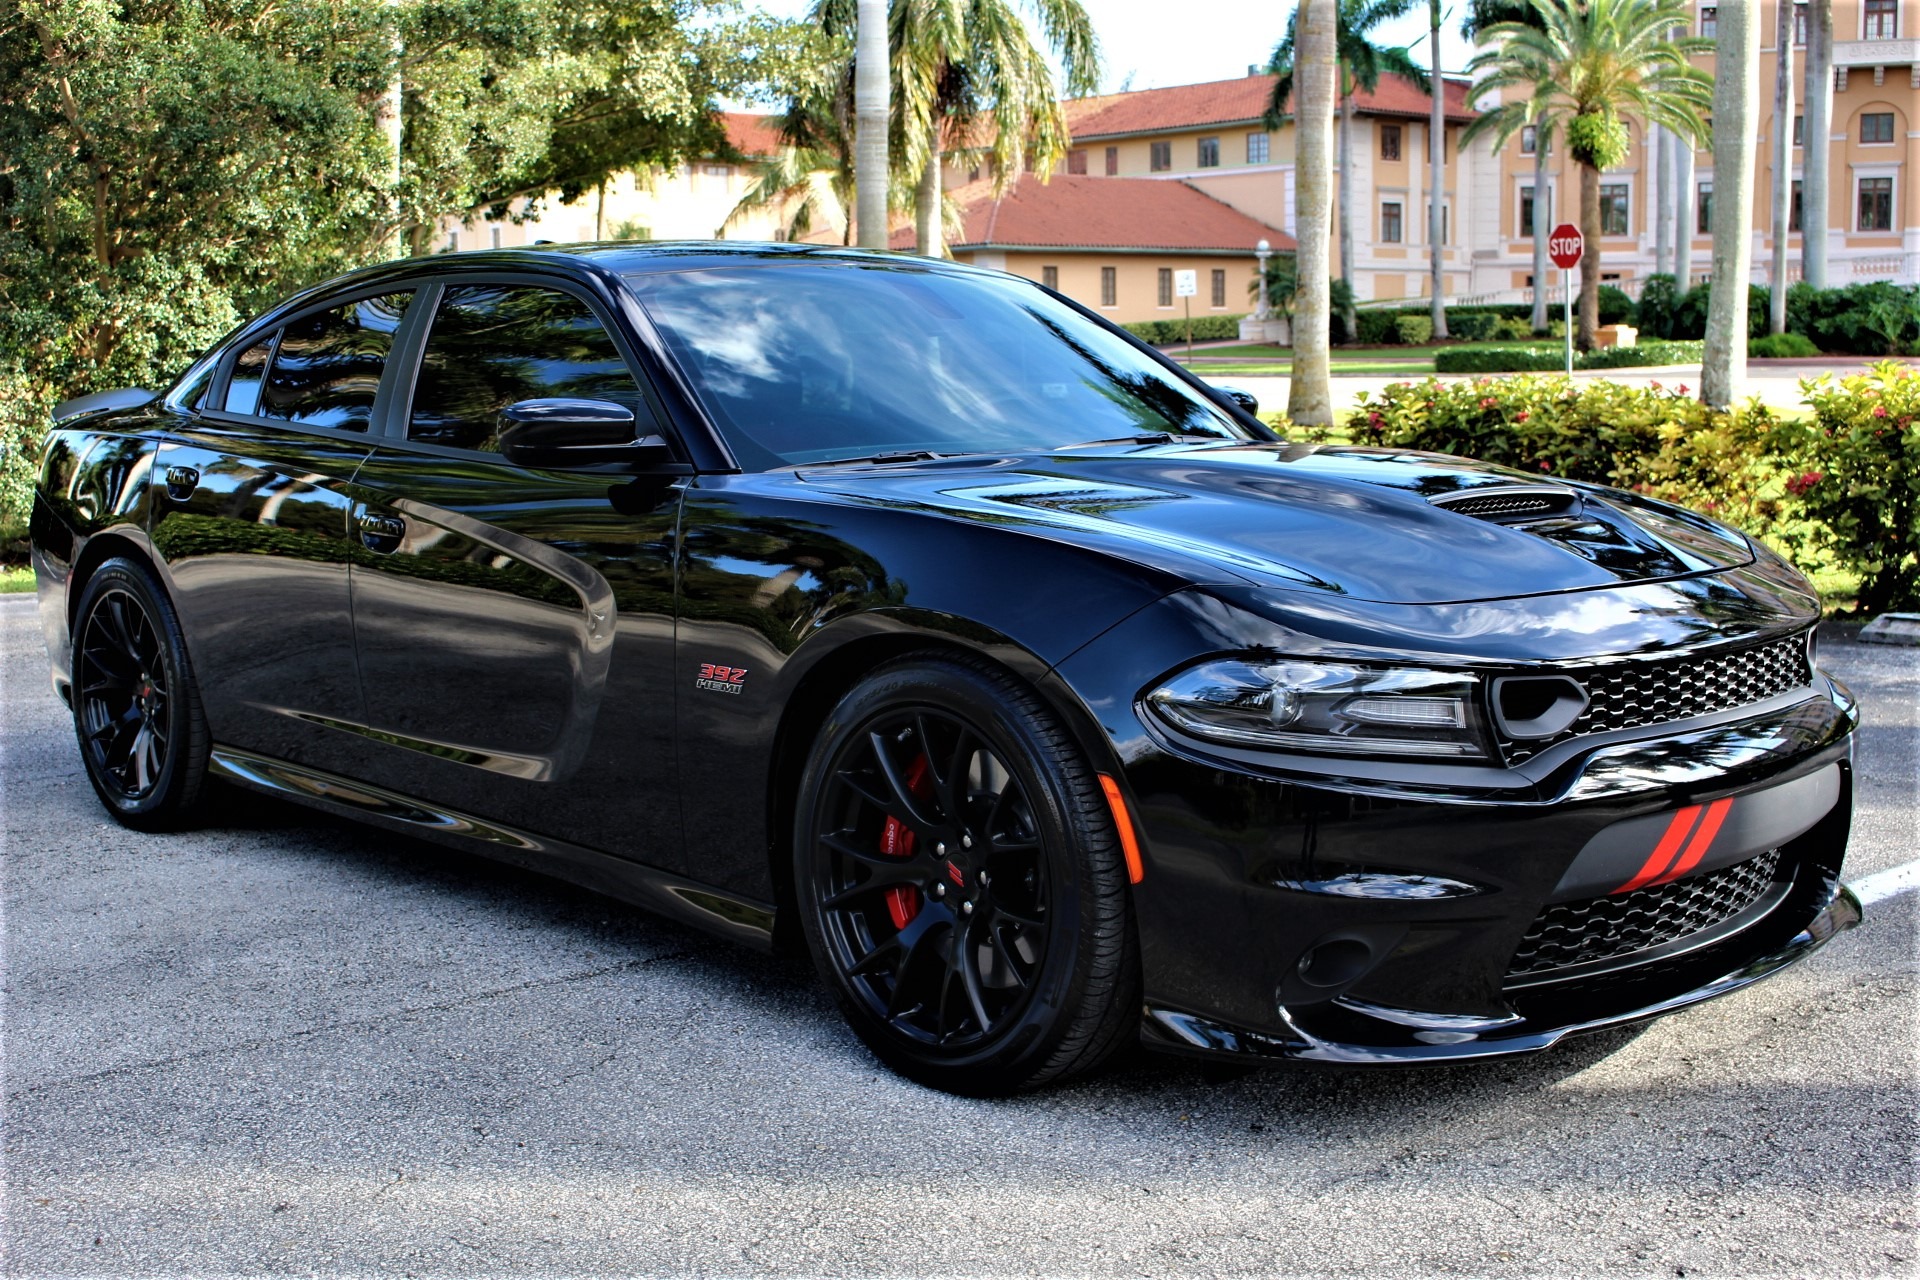 Used 2019 Dodge Charger R/T Scat Pack for sale Sold at The Gables Sports Cars in Miami FL 33146 1